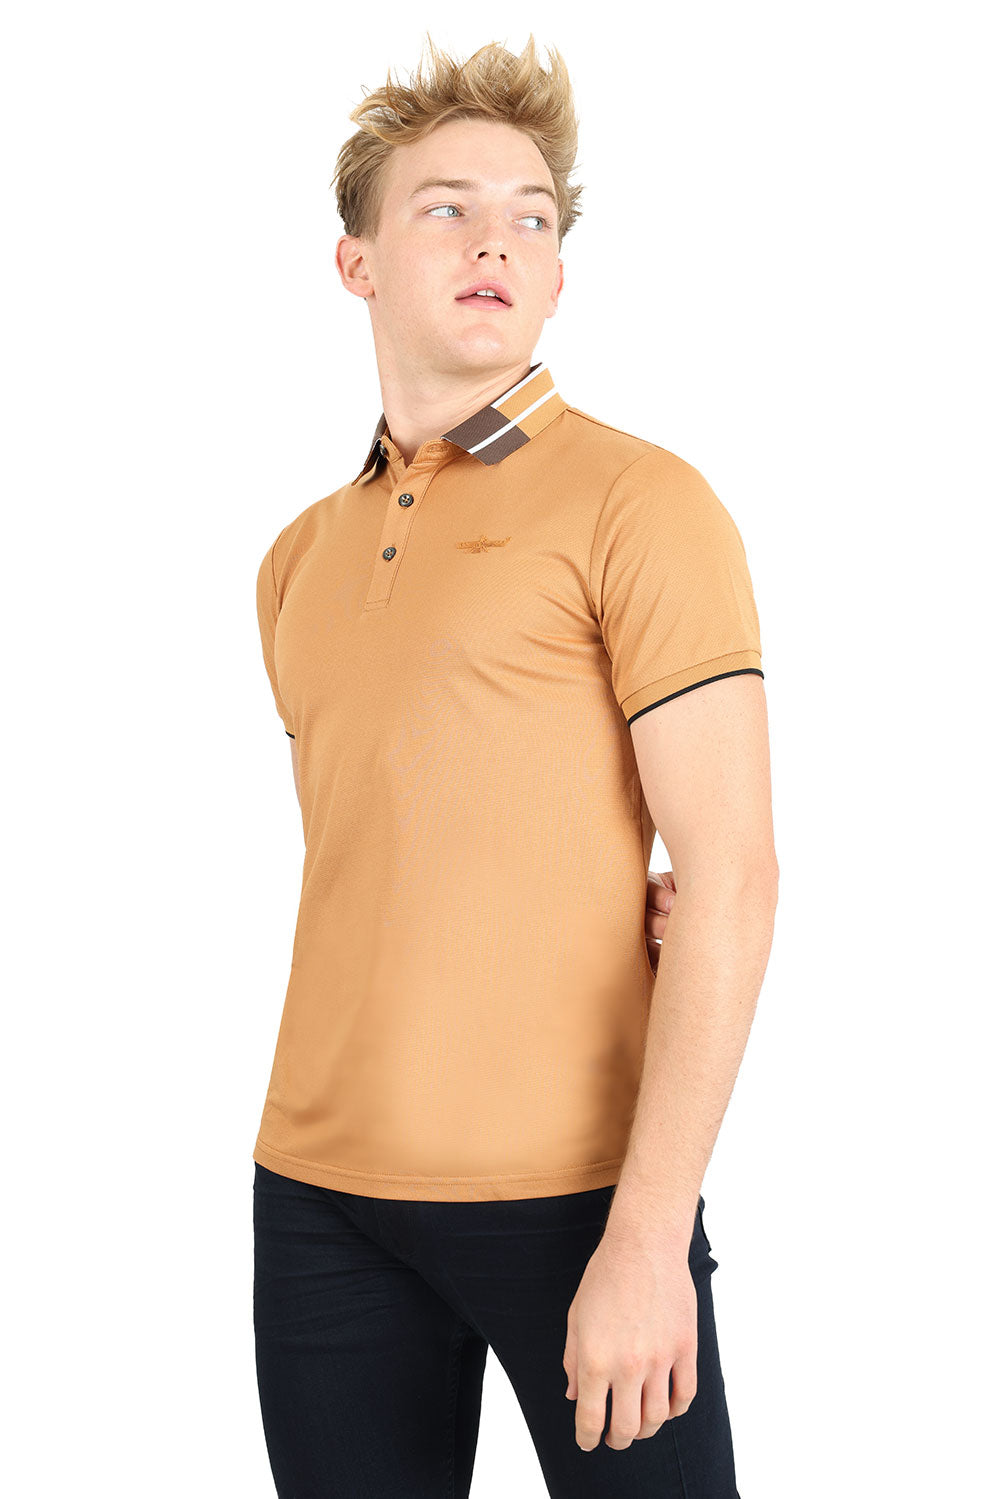 Barabas Men's Solid Color Luxury Short Sleeves Polo Shirts 2PP826 Coffee